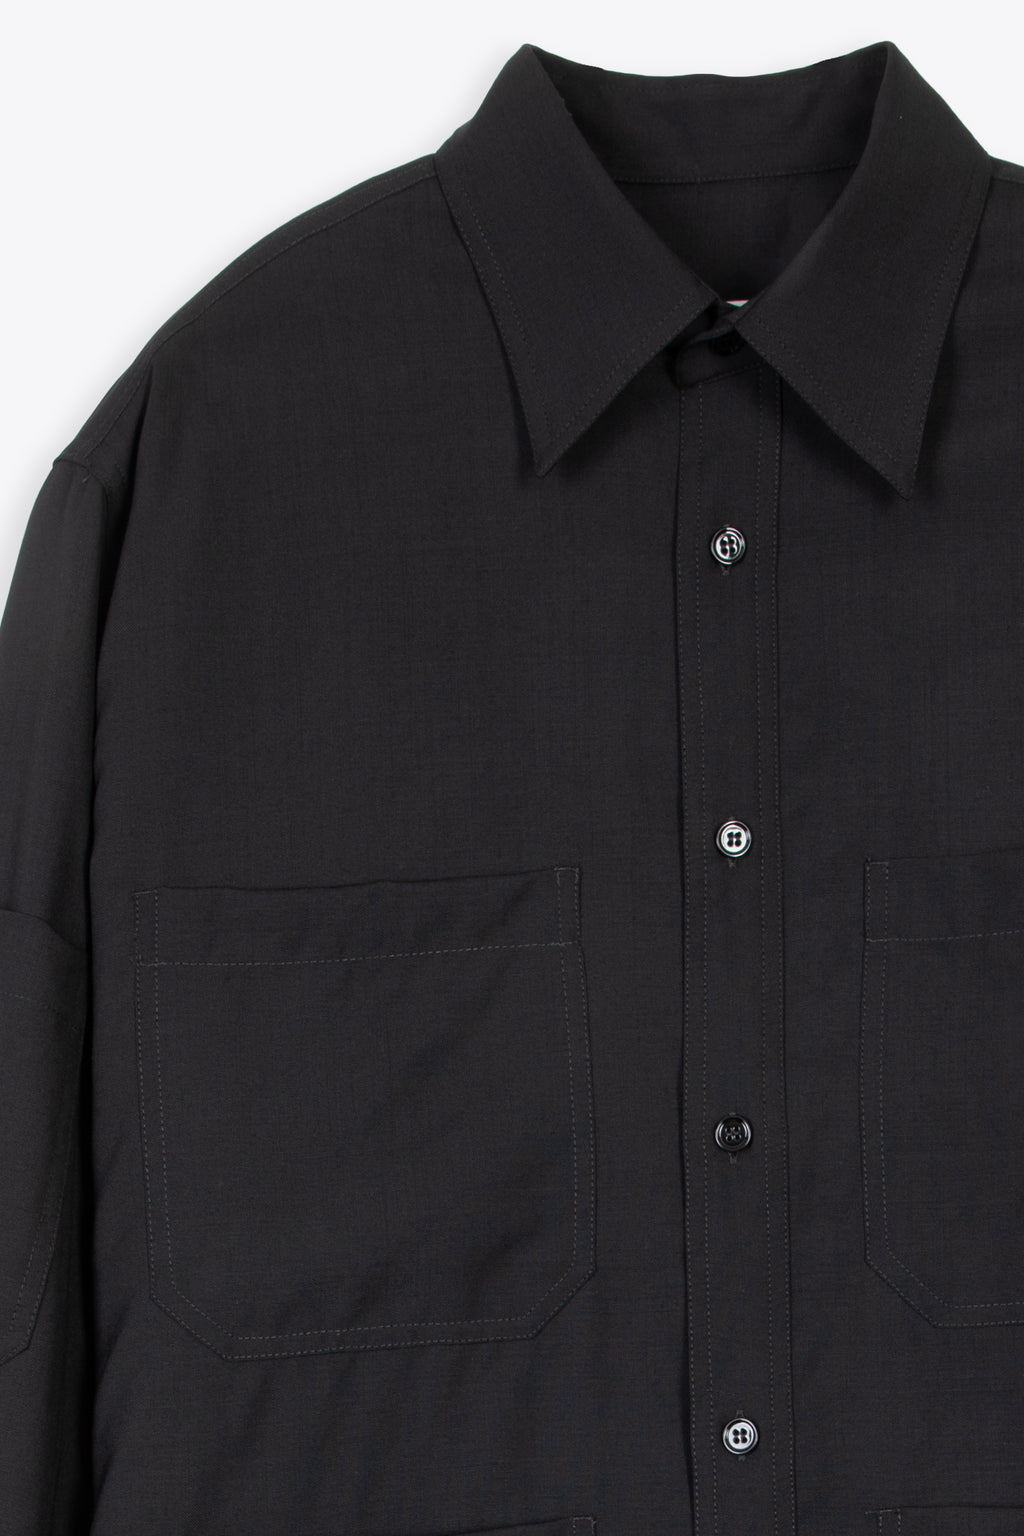 alt-image__Black-wool-shirt-with-front-pockets-